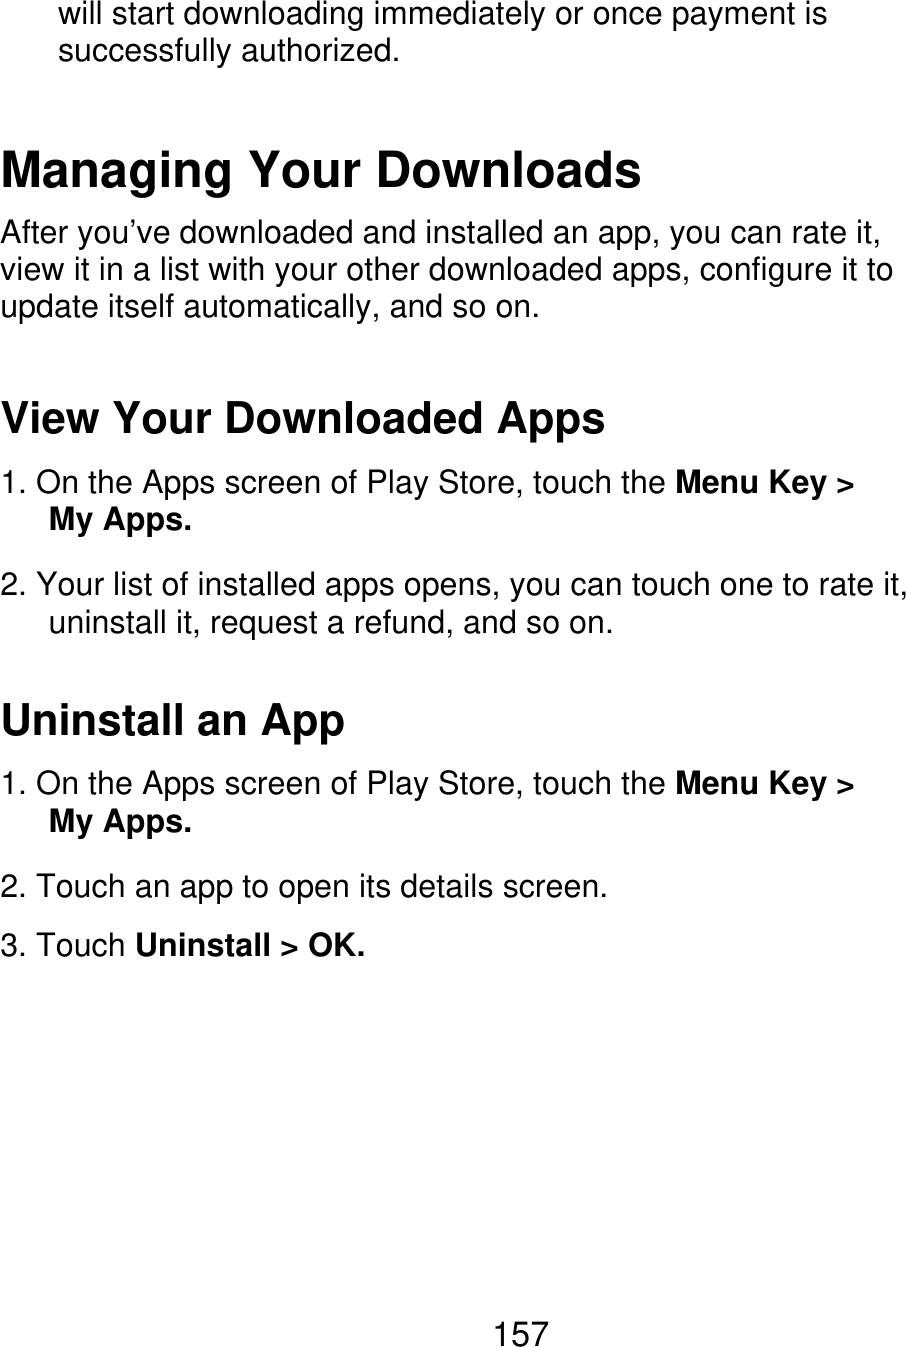 will start downloading immediately or once payment is successfully authorized. Managing Your Downloads After you’ve downloaded and installed an app, you can rate it, view it in a list with your other downloaded apps, configure it to update itself automatically, and so on. View Your Downloaded Apps 1. On the Apps screen of Play Store, touch the Menu Key &gt;    My Apps. 2. Your list of installed apps opens, you can touch one to rate it,       uninstall it, request a refund, and so on. Uninstall an App 1. On the Apps screen of Play Store, touch the Menu Key &gt;    My Apps. 2. Touch an app to open its details screen. 3. Touch Uninstall &gt; OK. 157 